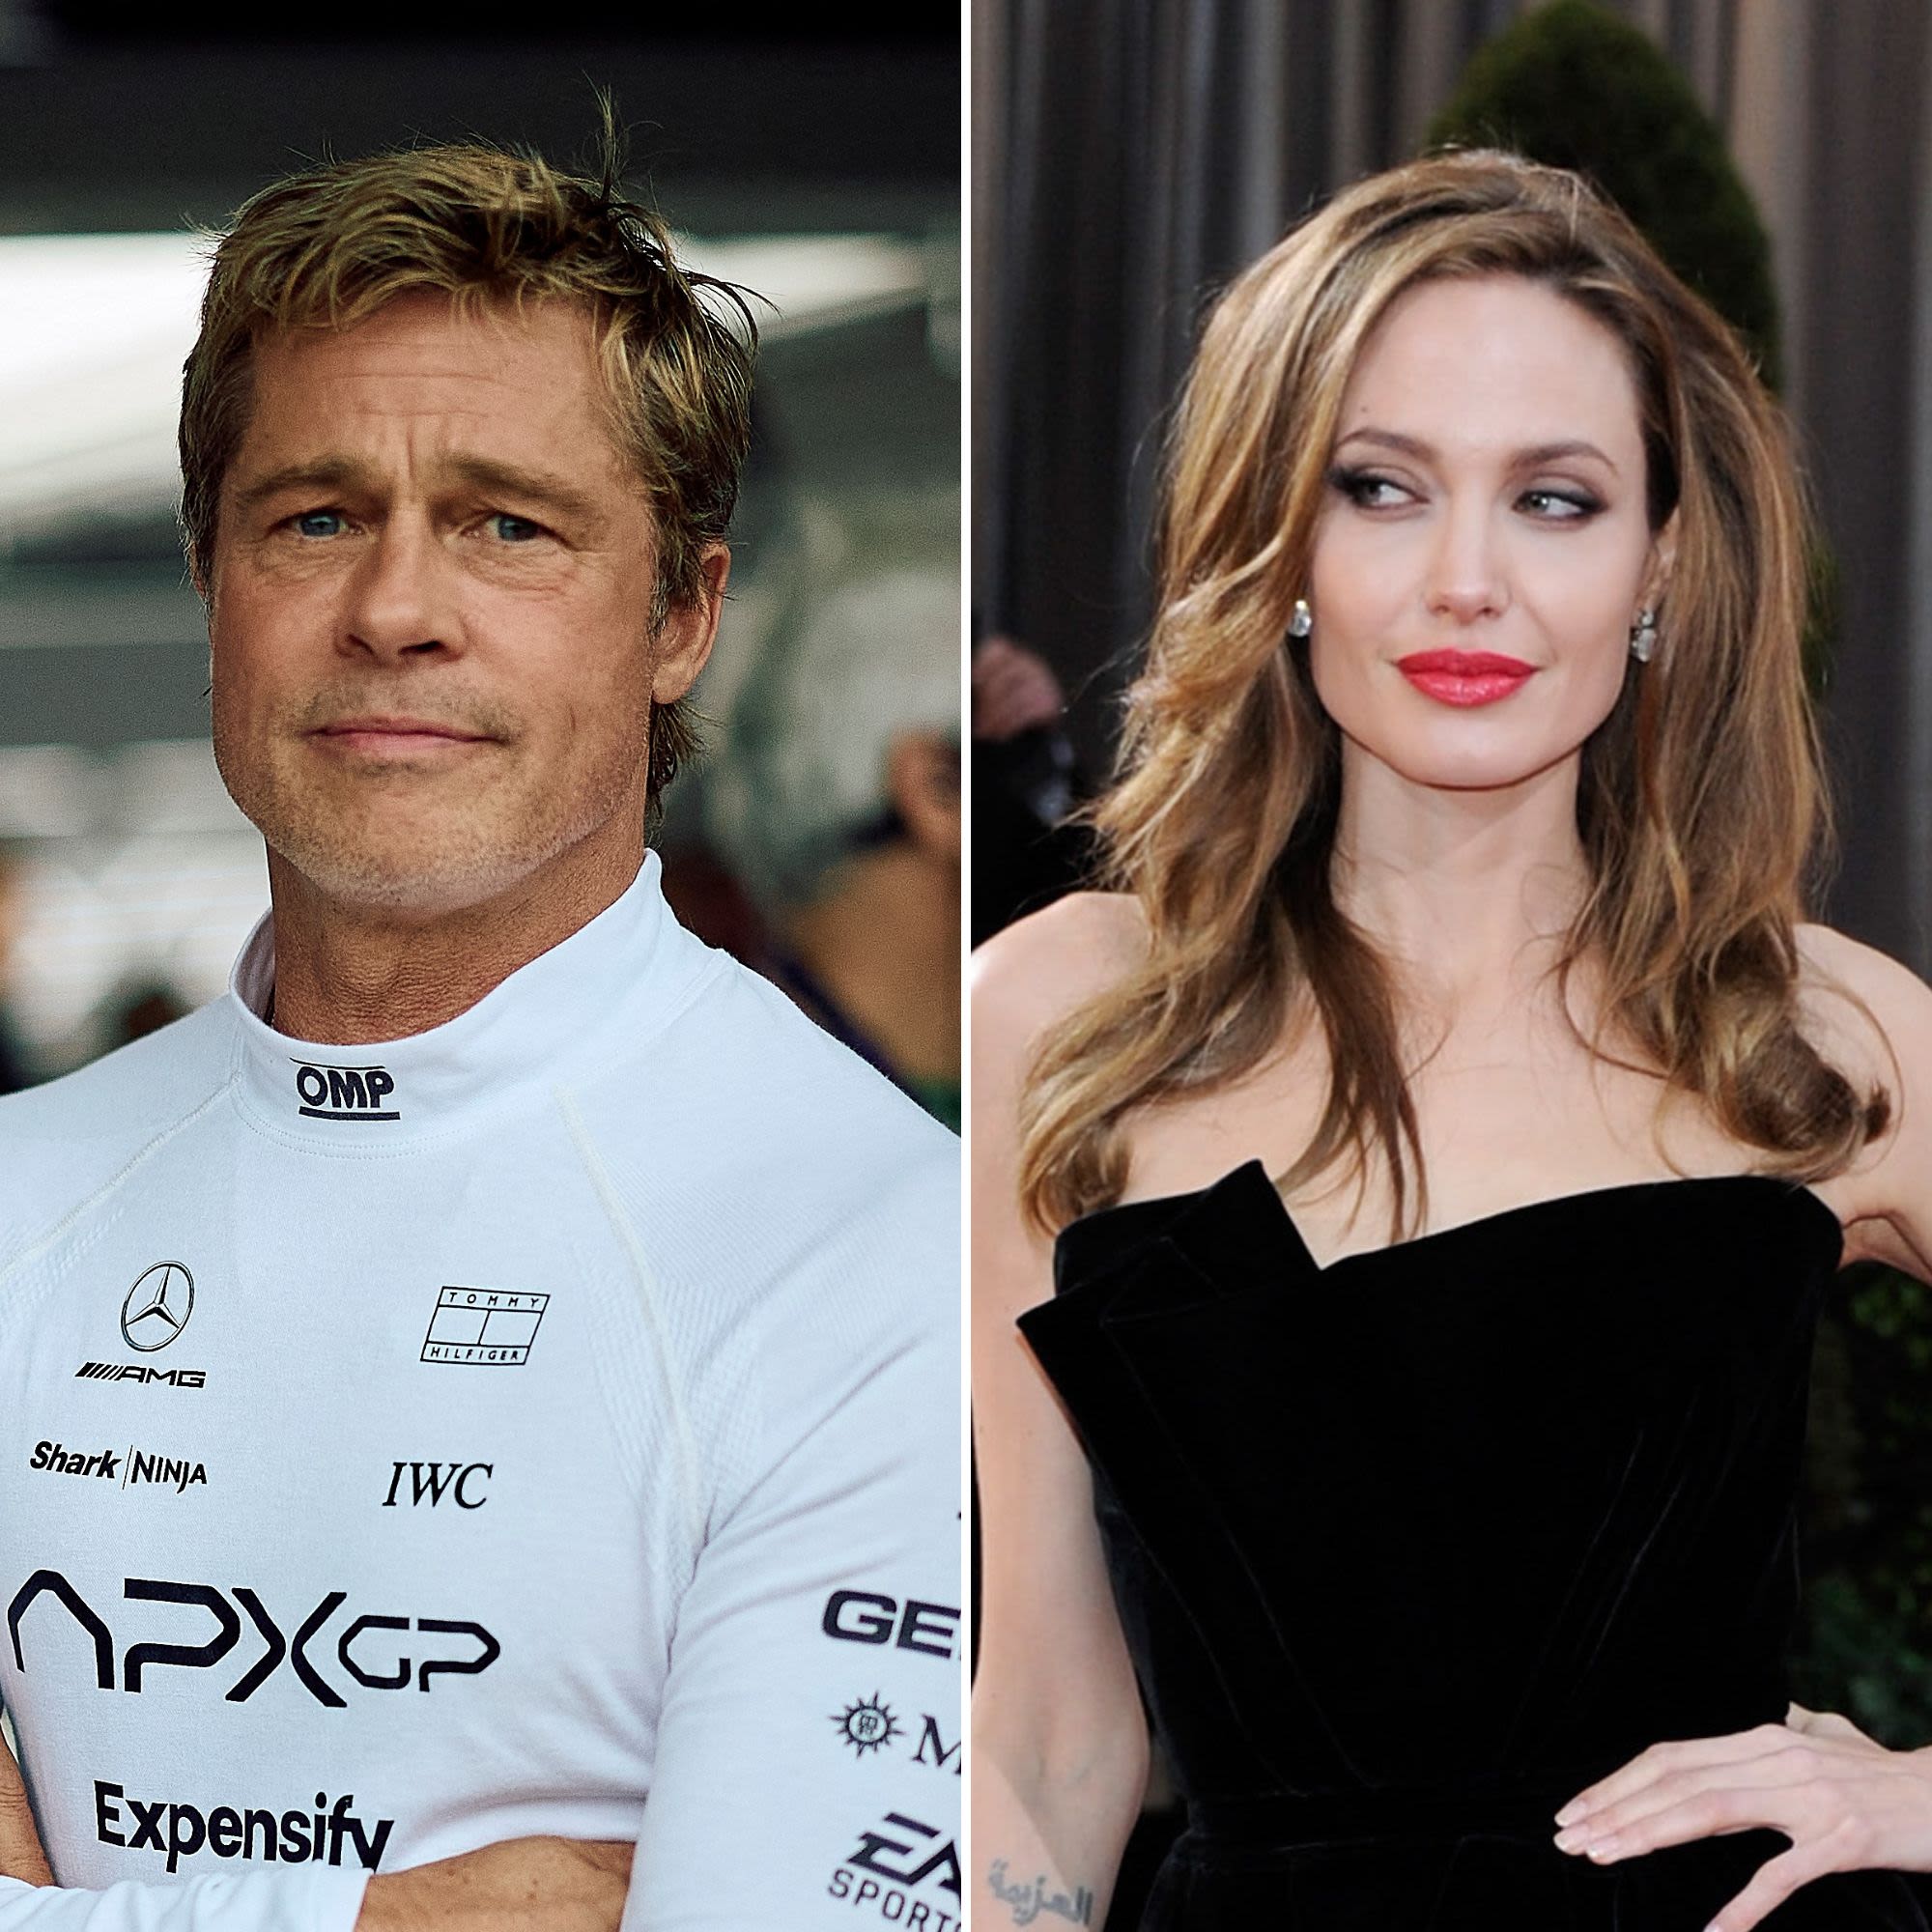 Brad Pitt Slams Ex Angelina Jolie Over ‘Intrusive’ Demands for His Private Emails in $350 Million Court War